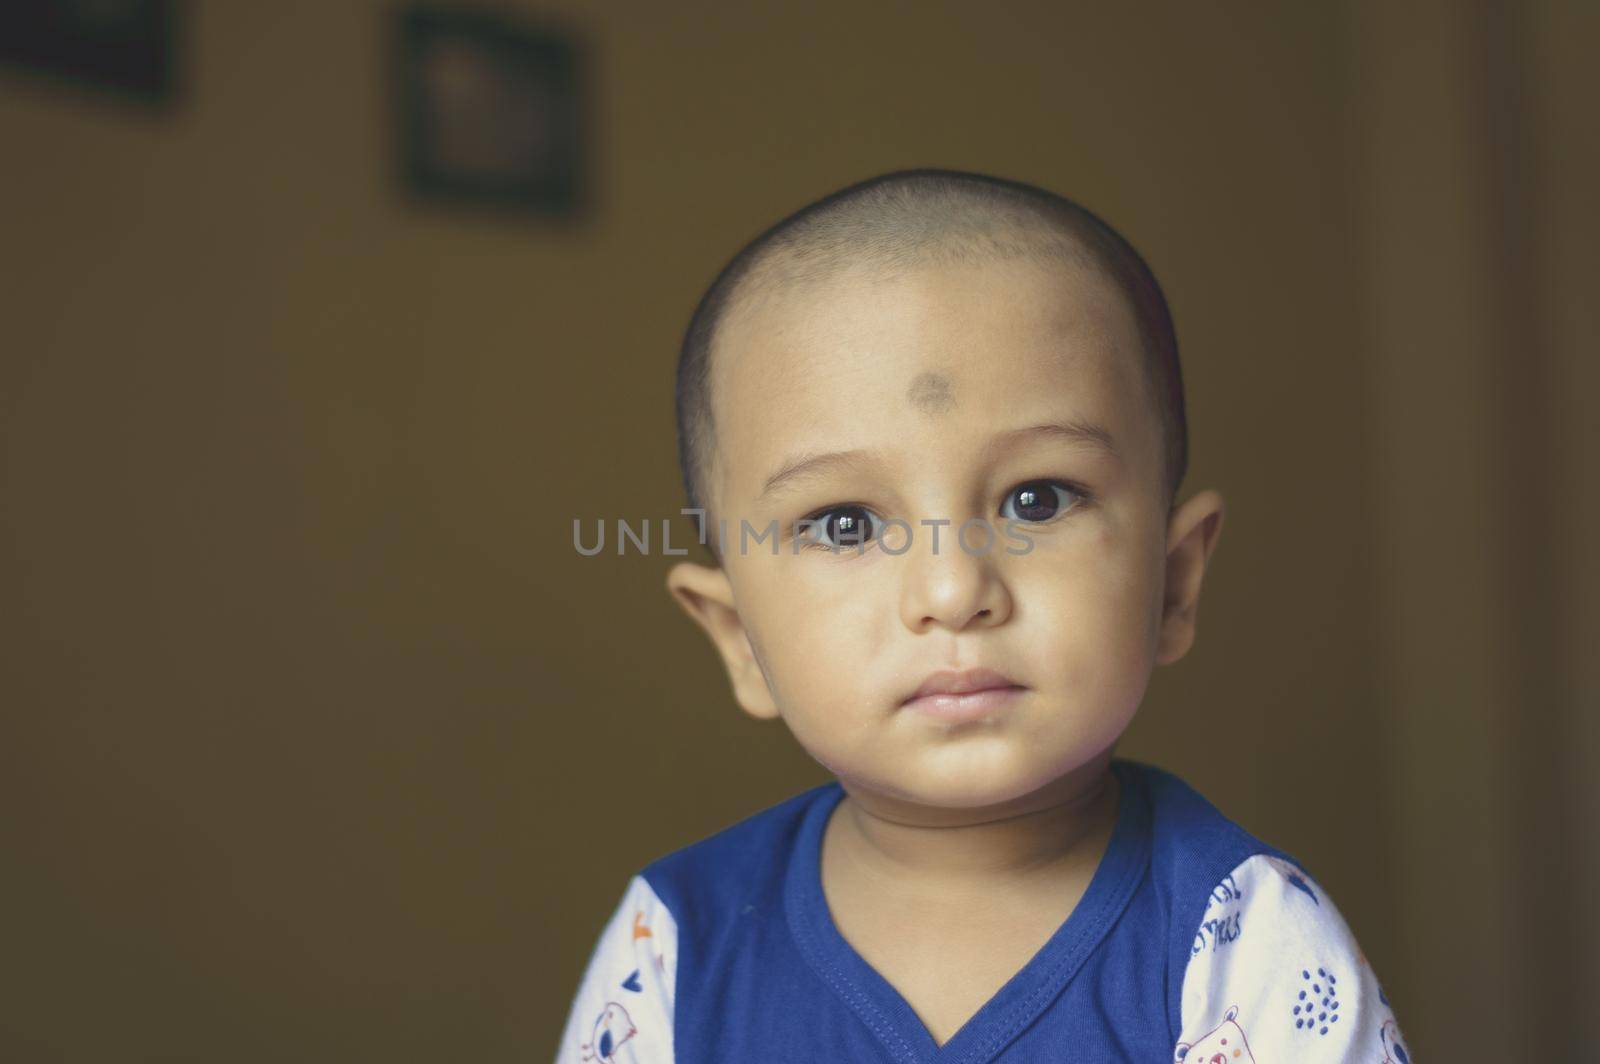 Cute bald indian baby boy in blue and white shirt looking away. Head and shoulder shot. Close up.